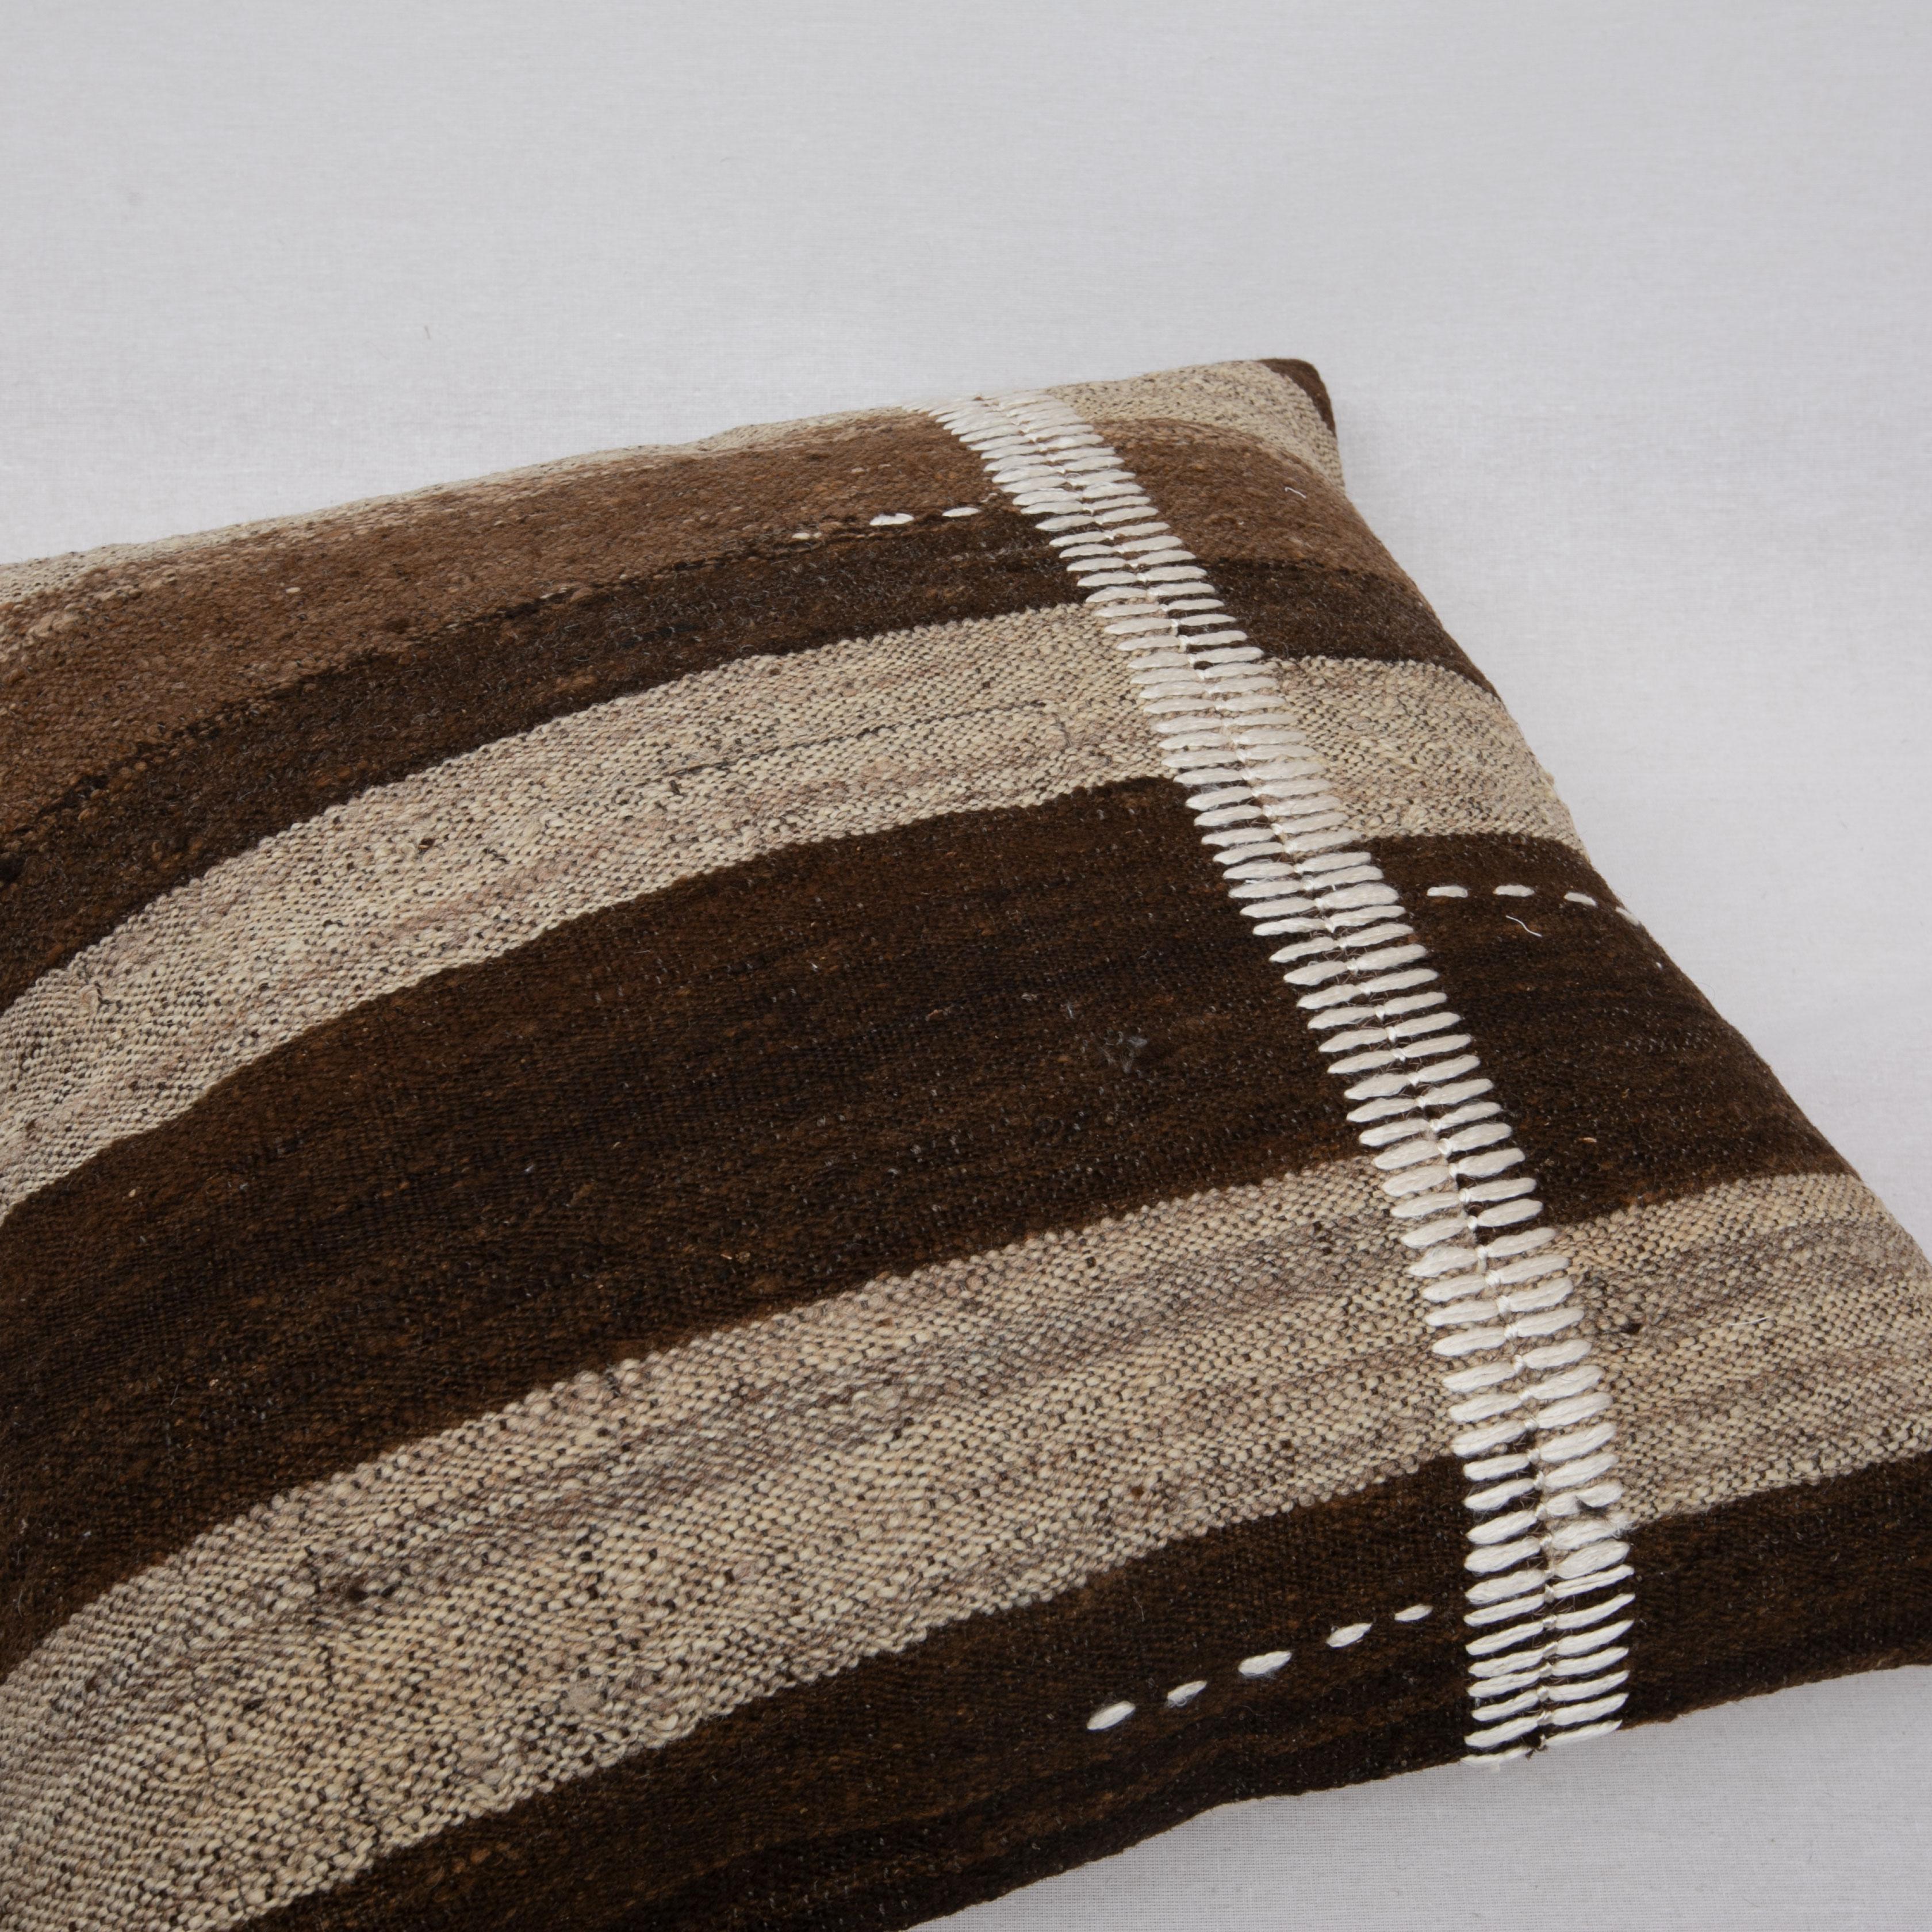 20th Century Rustic Pillow Case Made from a Vintage Un-Dyed Wool Coverlet, Mid 20th C. For Sale